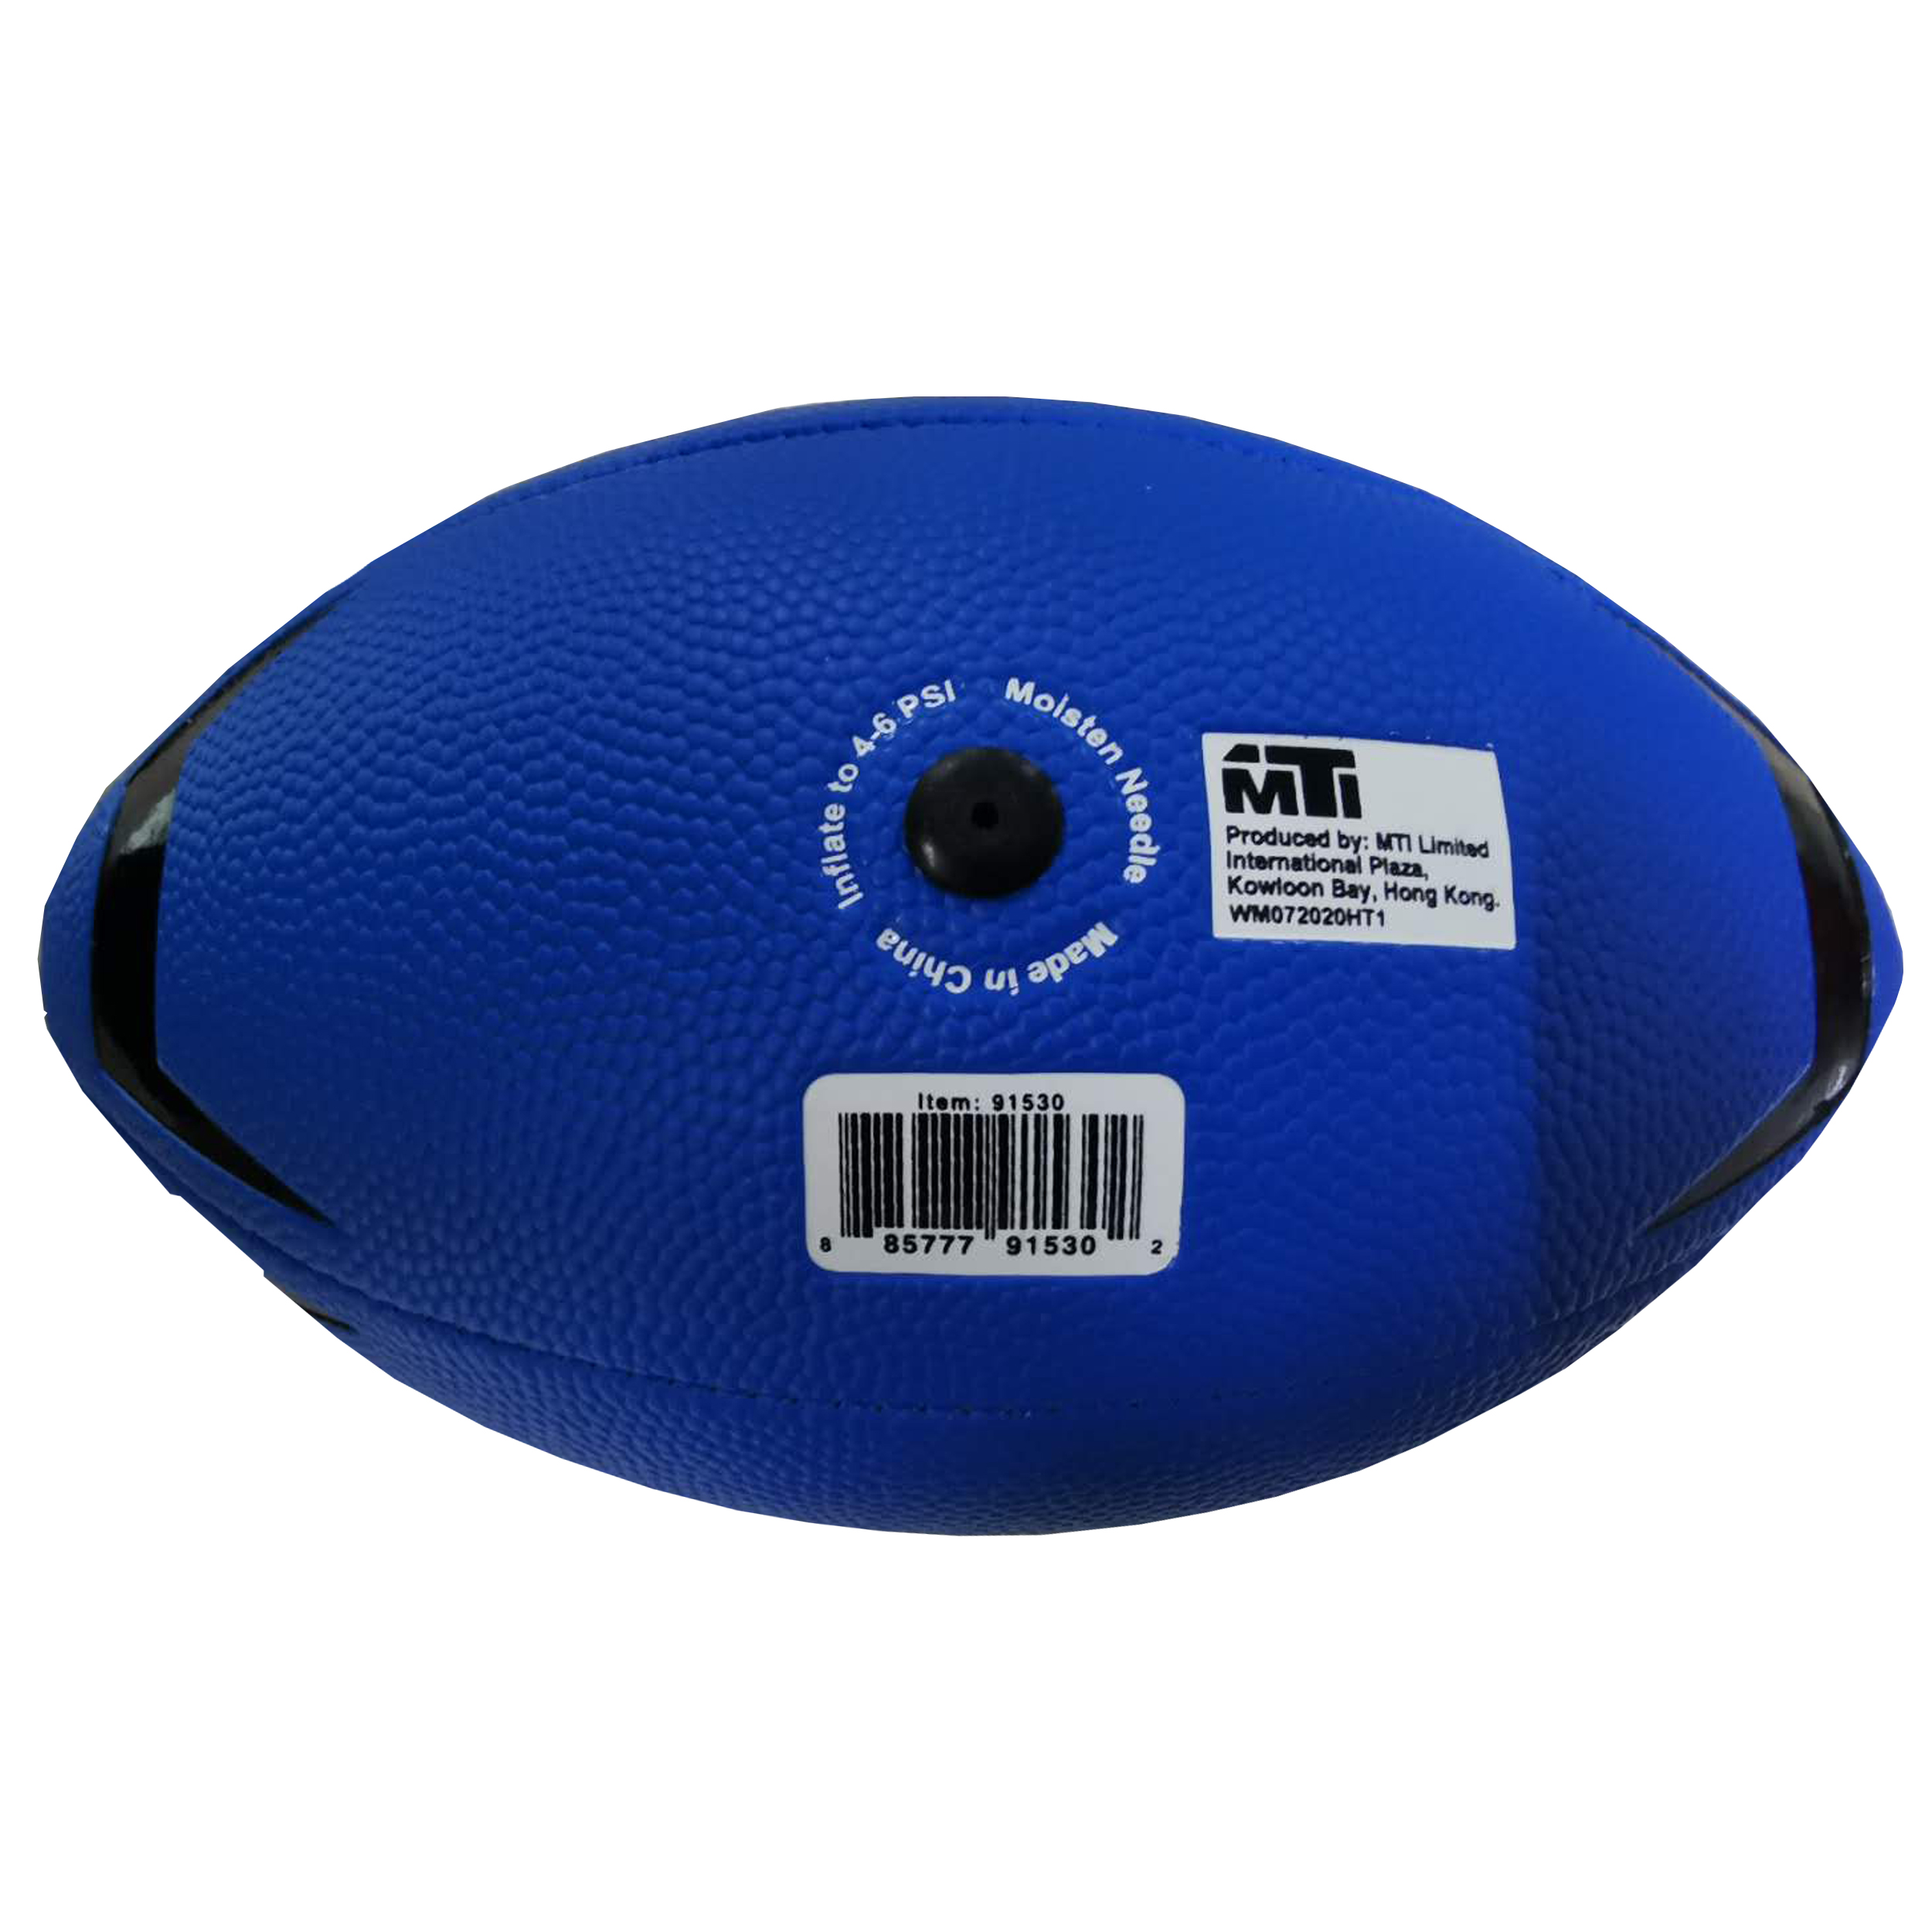 Magic Time Mini 6” Rubber Football Toy Ball, Kids Teen, Unisex, Assorted Colors Black, Red, Blue - image 3 of 7